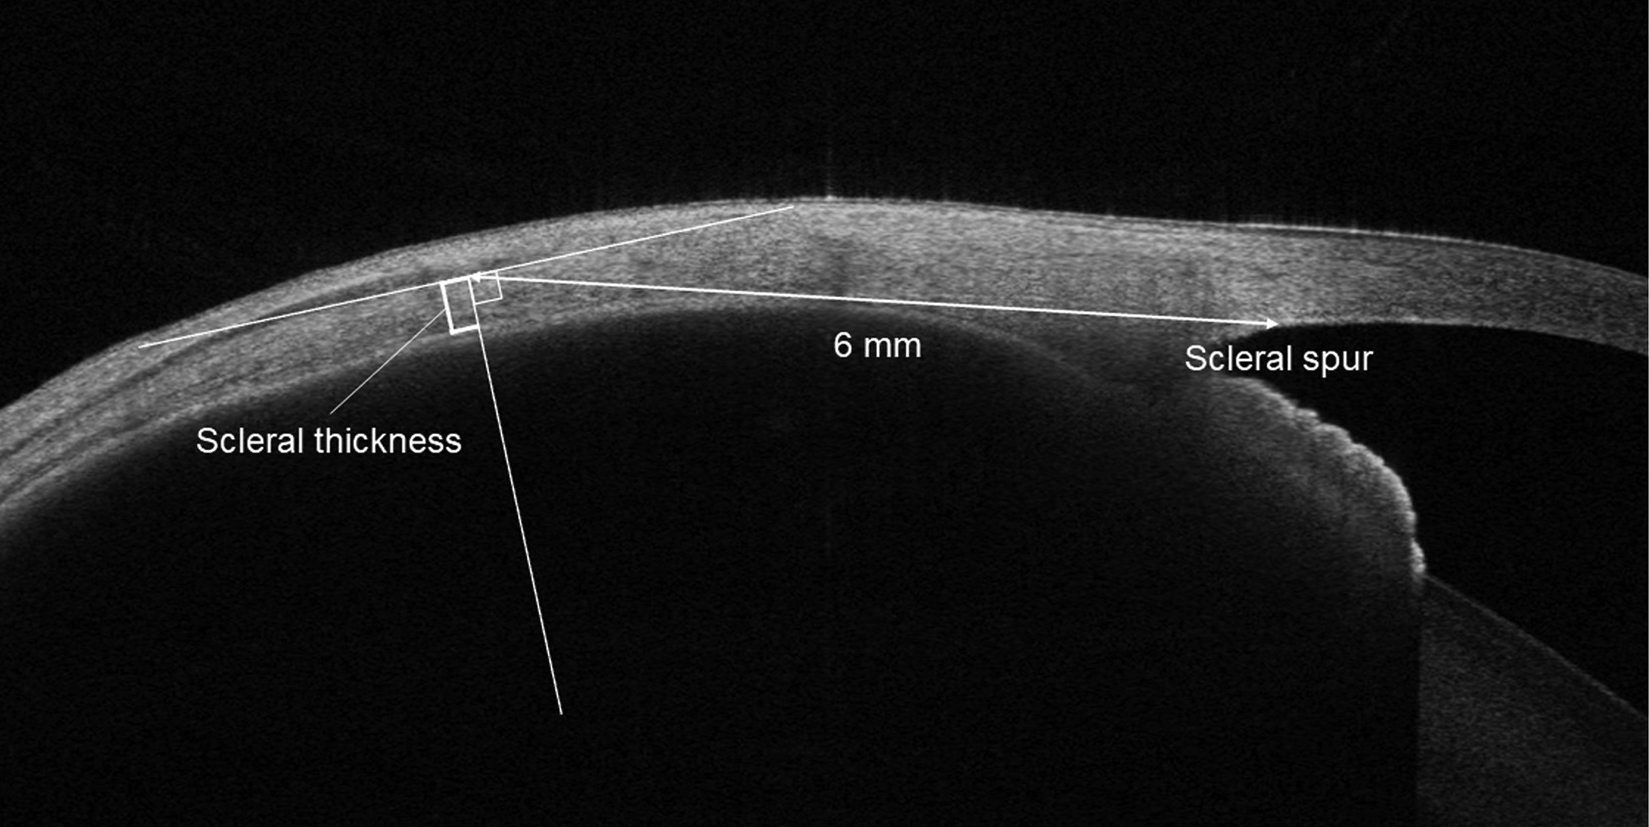 Researchers observed that complex central serous chorioretinopathy cases were more significantly associated with scleral thickening (measured here using anterior segment OCT), persistent subretinal fluid, outer retinal atrophy and intraretinal fluid.